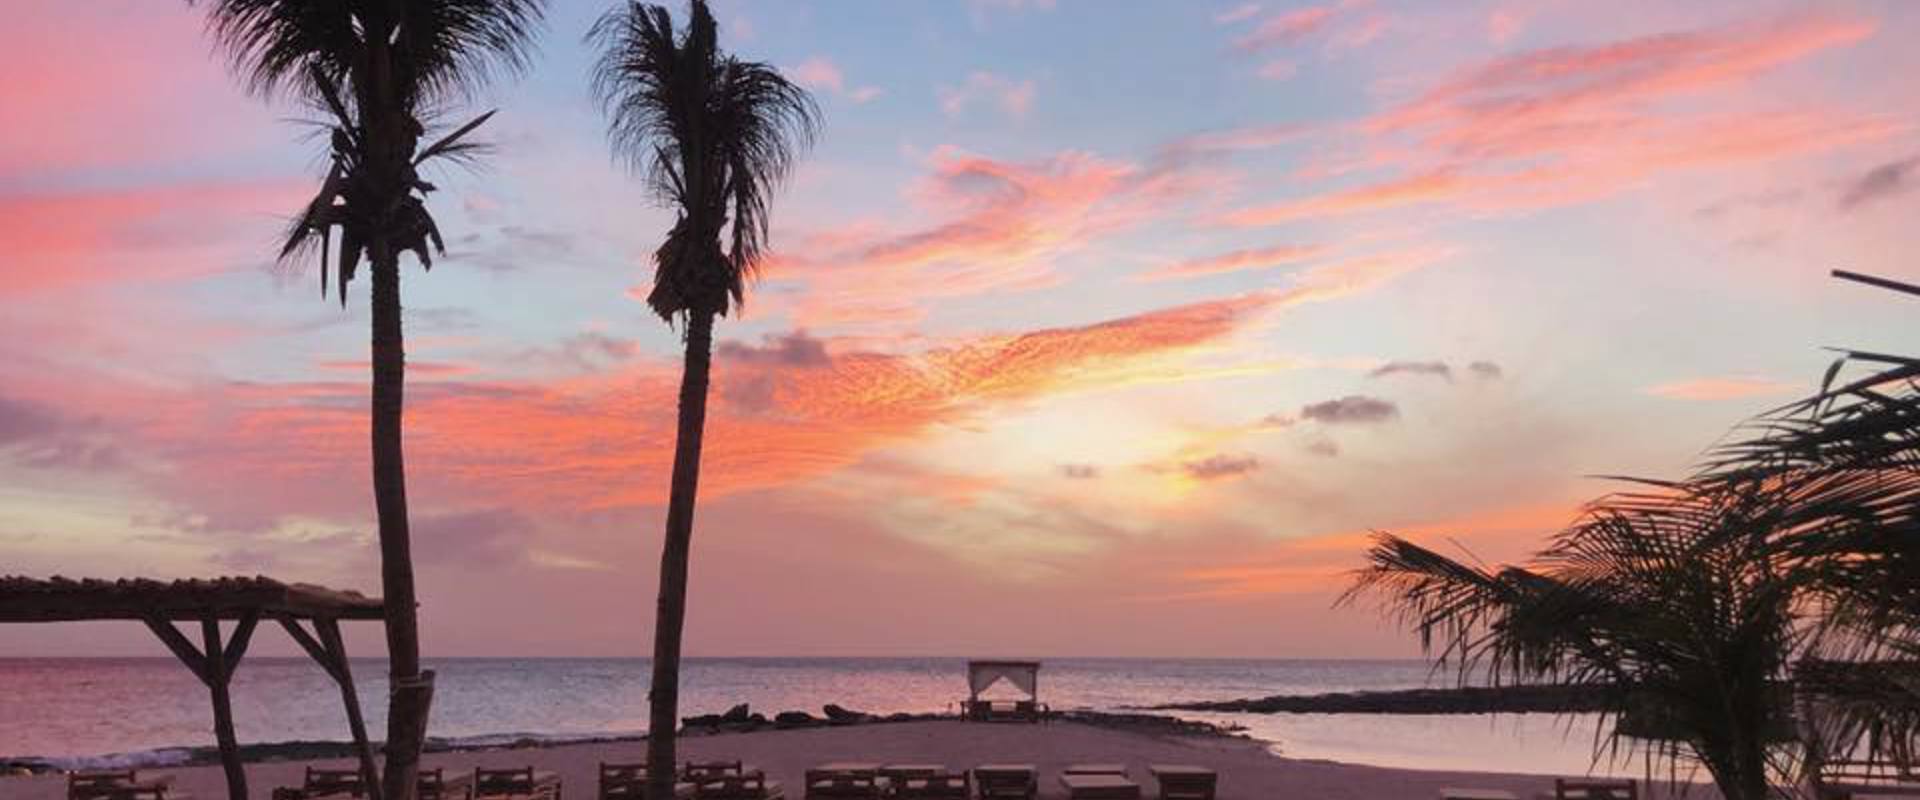 The 5 best hotspots on Bonaire to enjoy a sunset cocktail